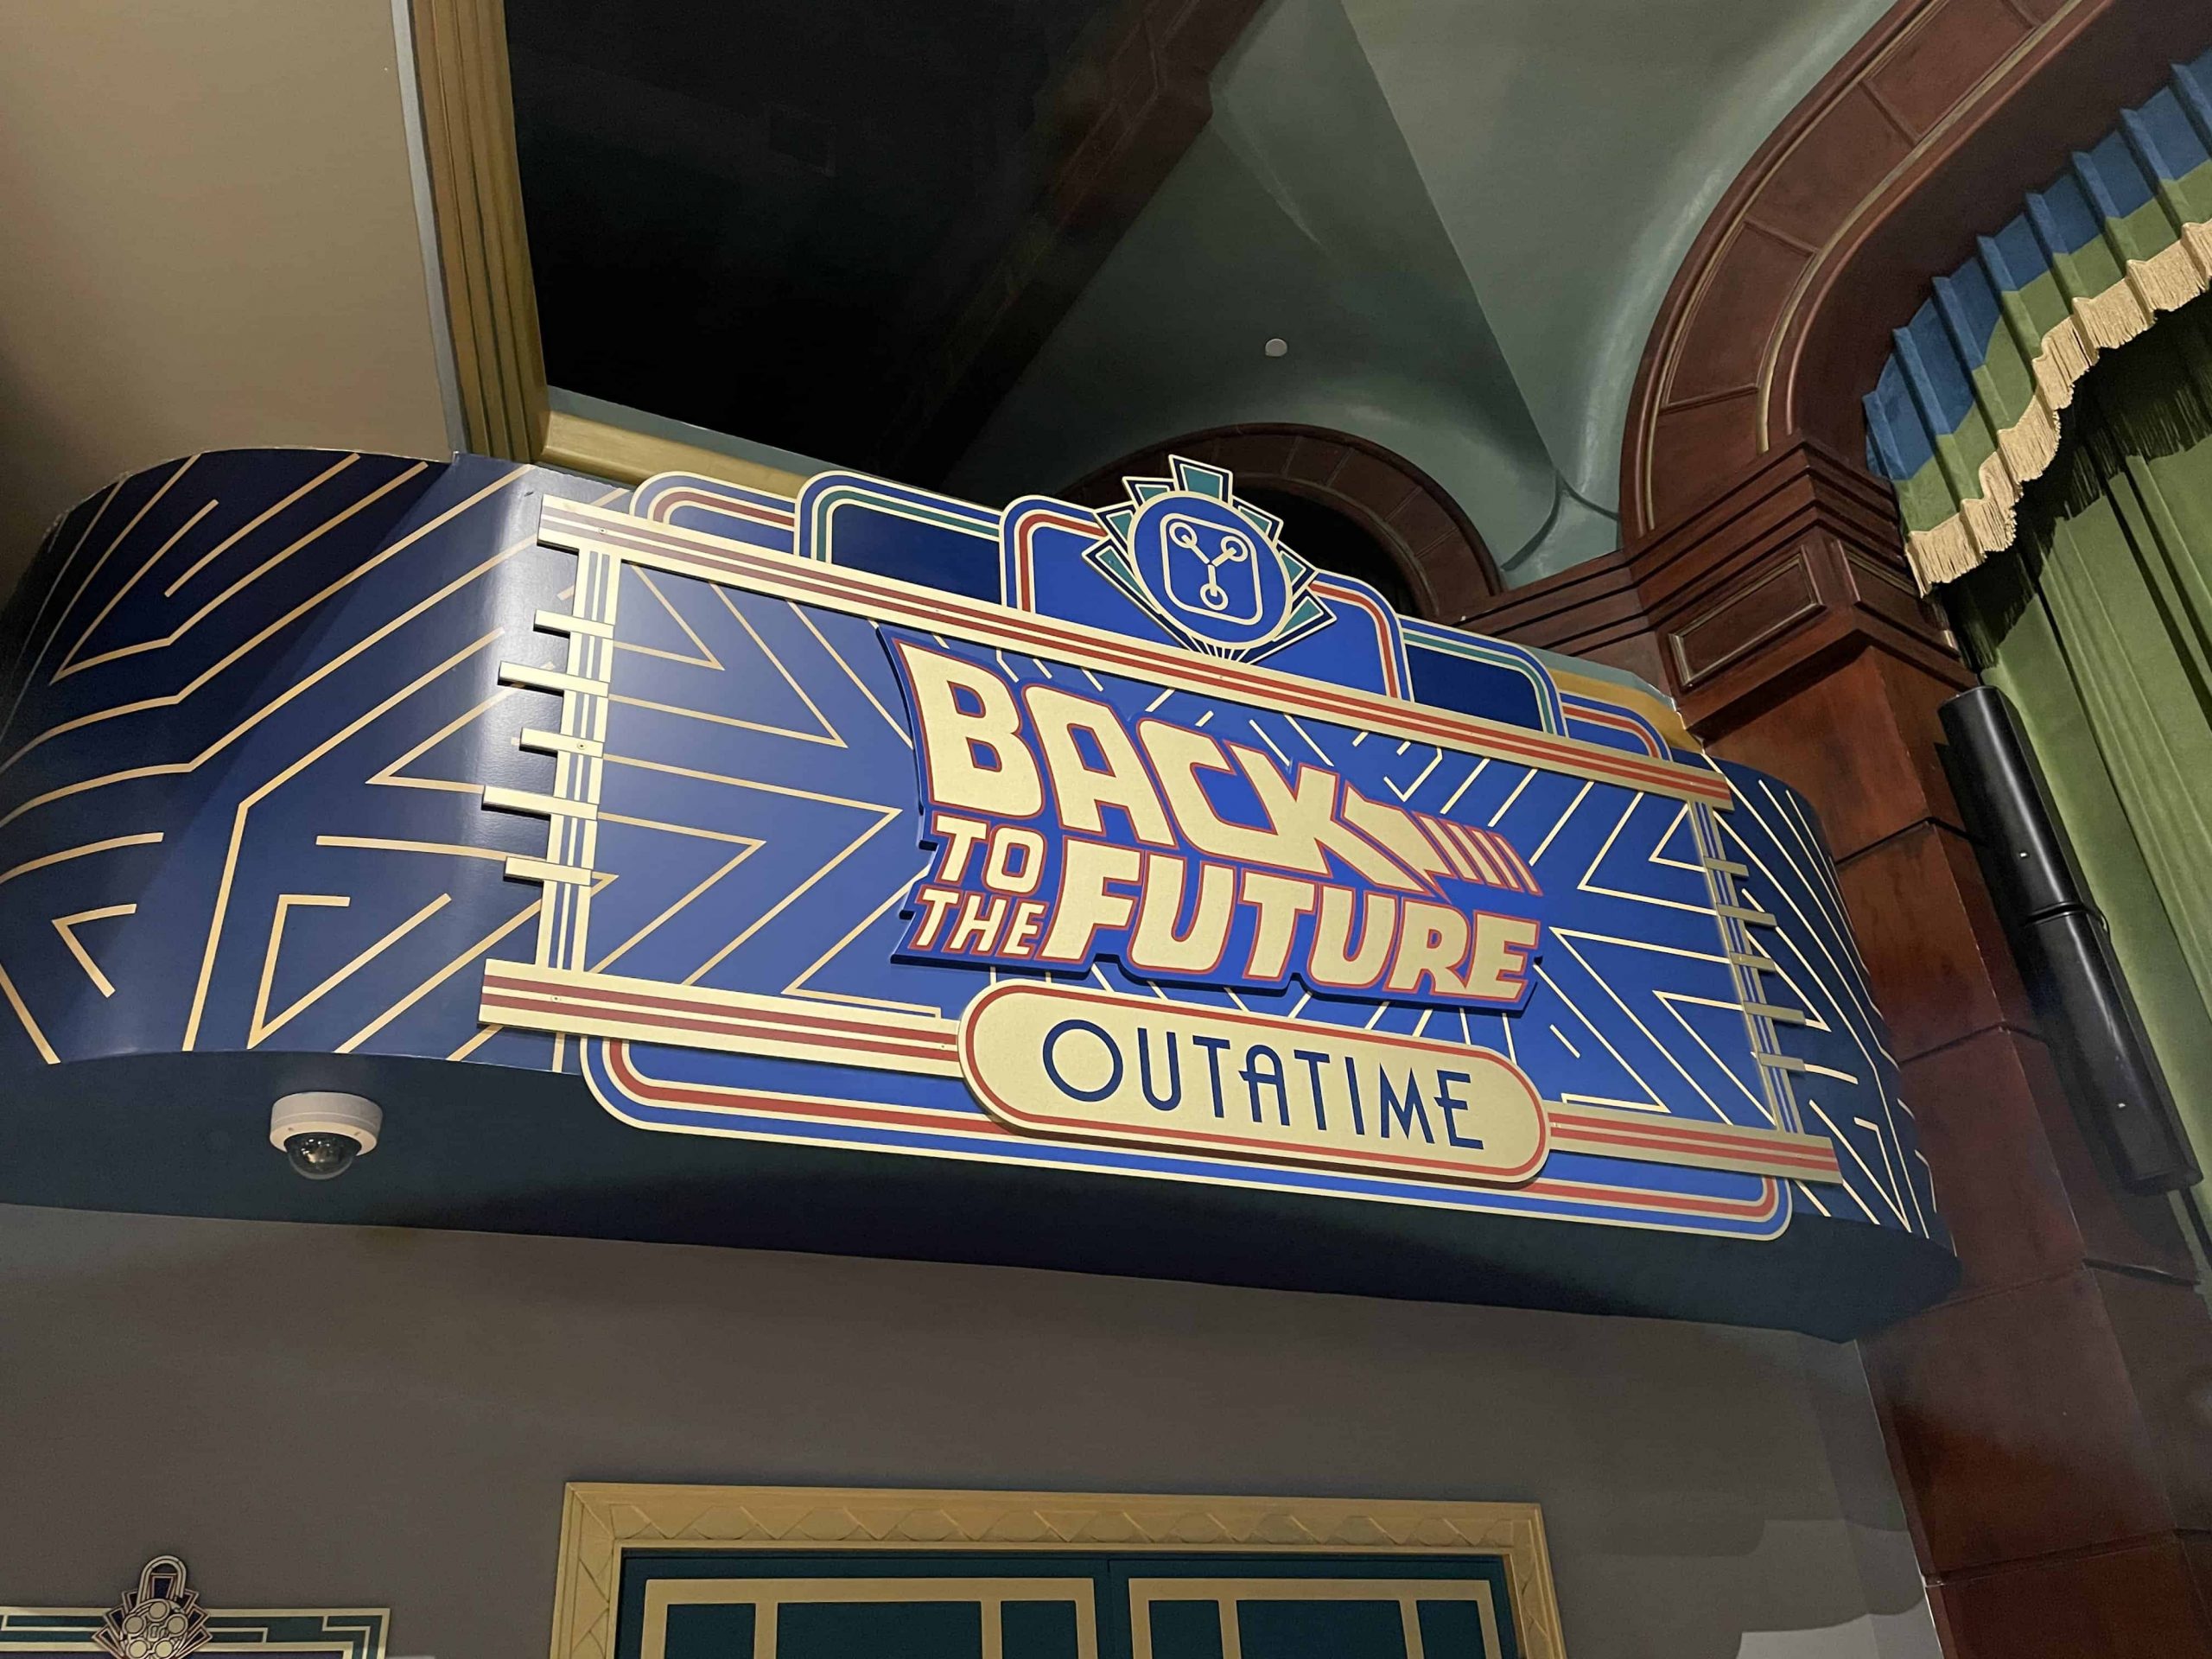 Back to the Future: OUTATIME at Universal's Great Movie Escape